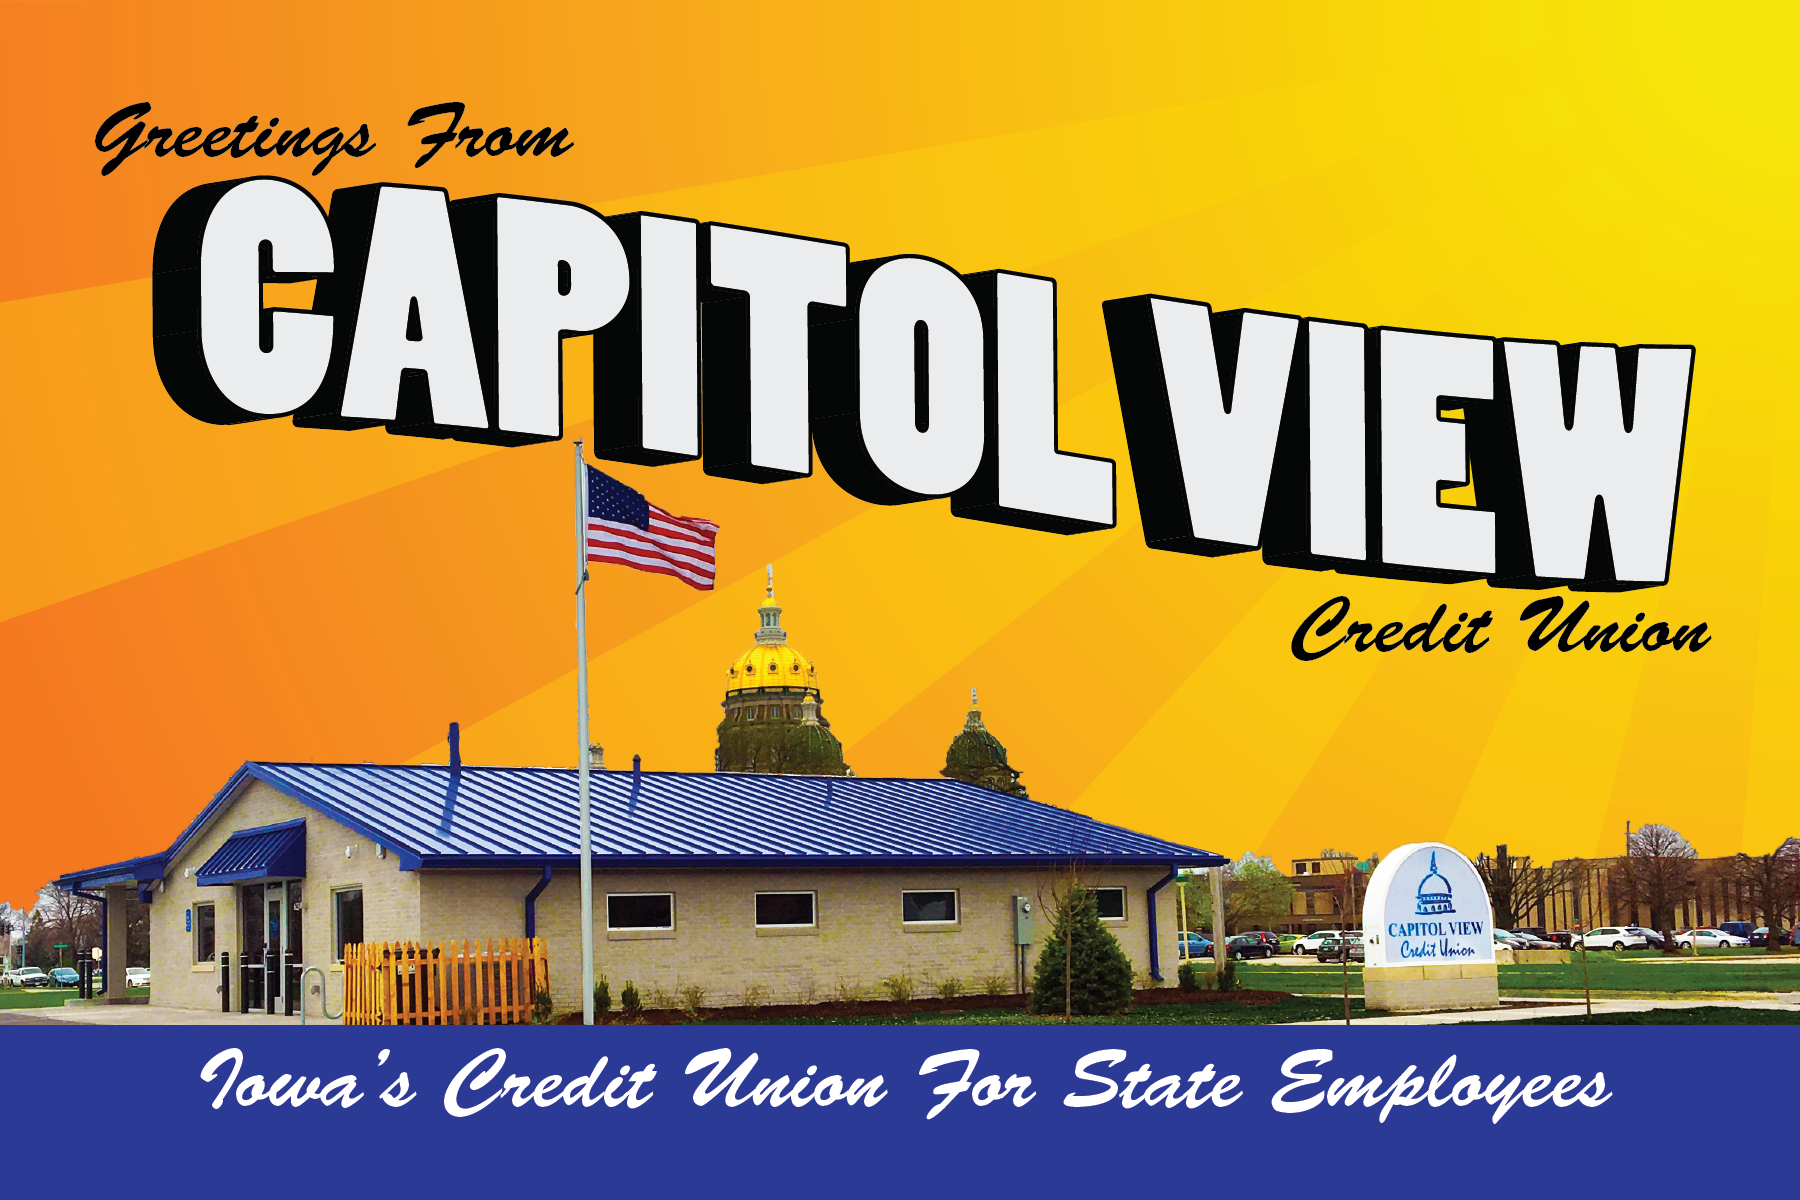 Greetings From Capitol View Credit Union